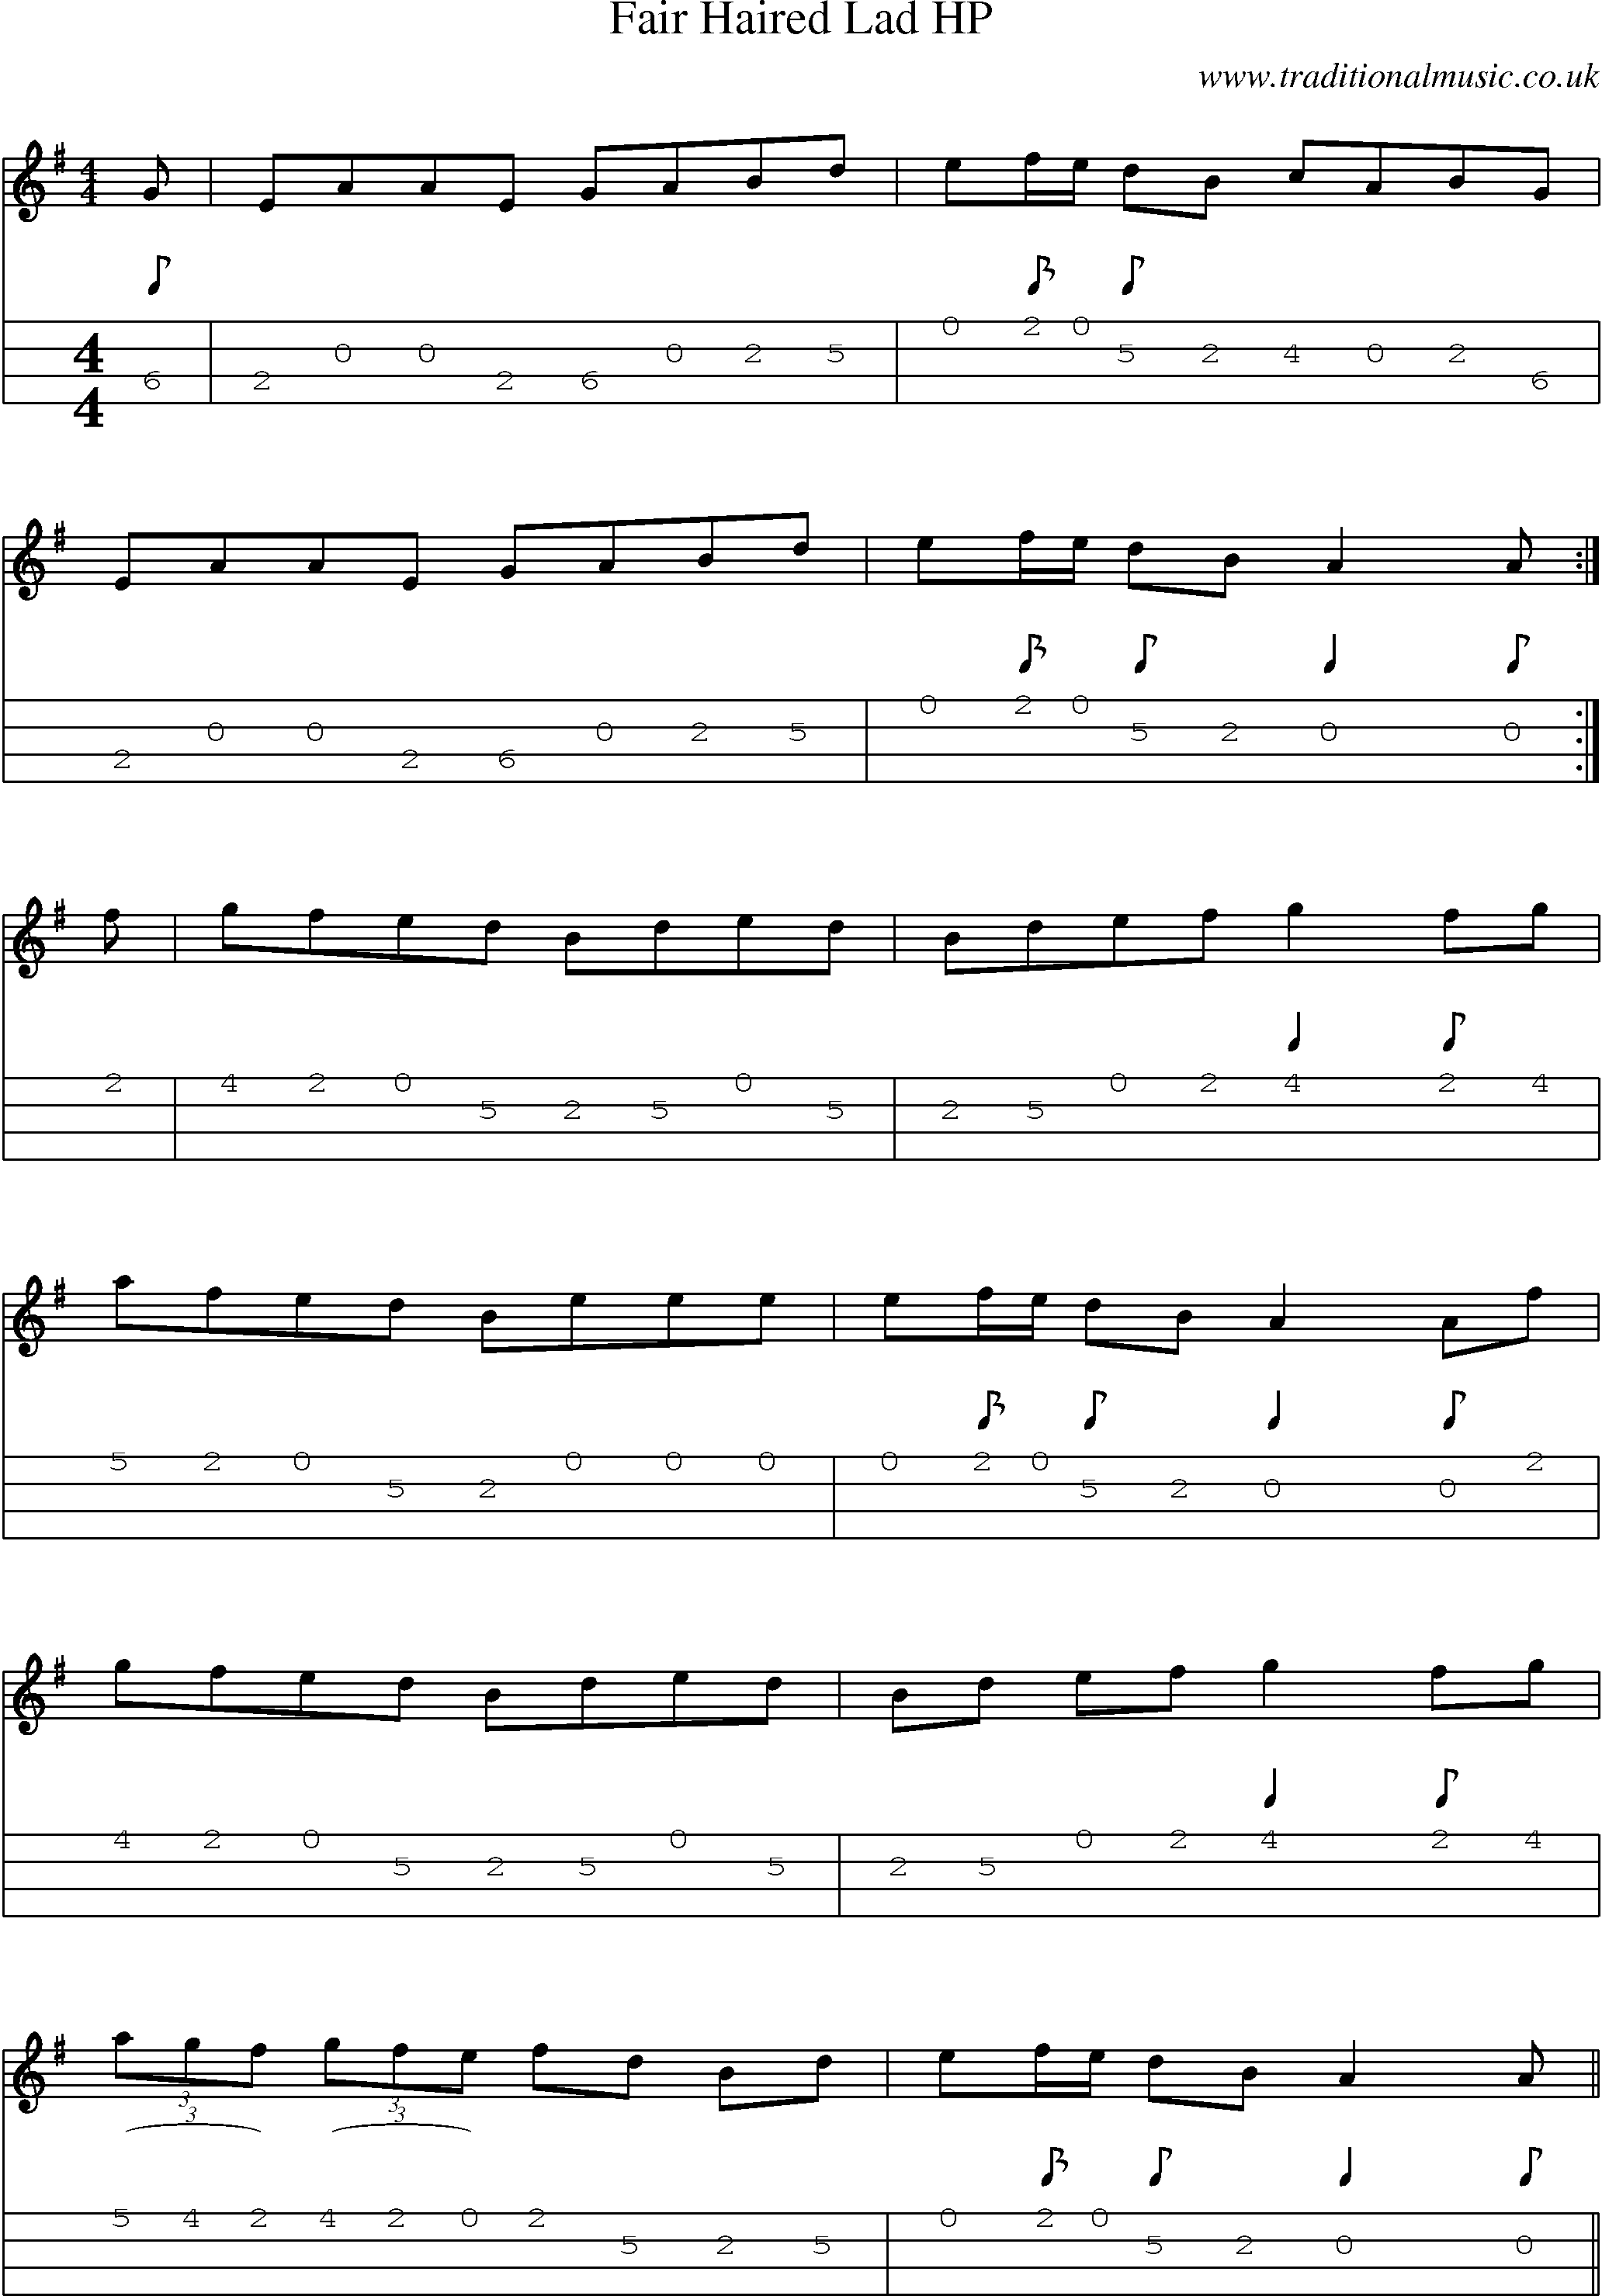 Music Score and Mandolin Tabs for Fair Haired Lad